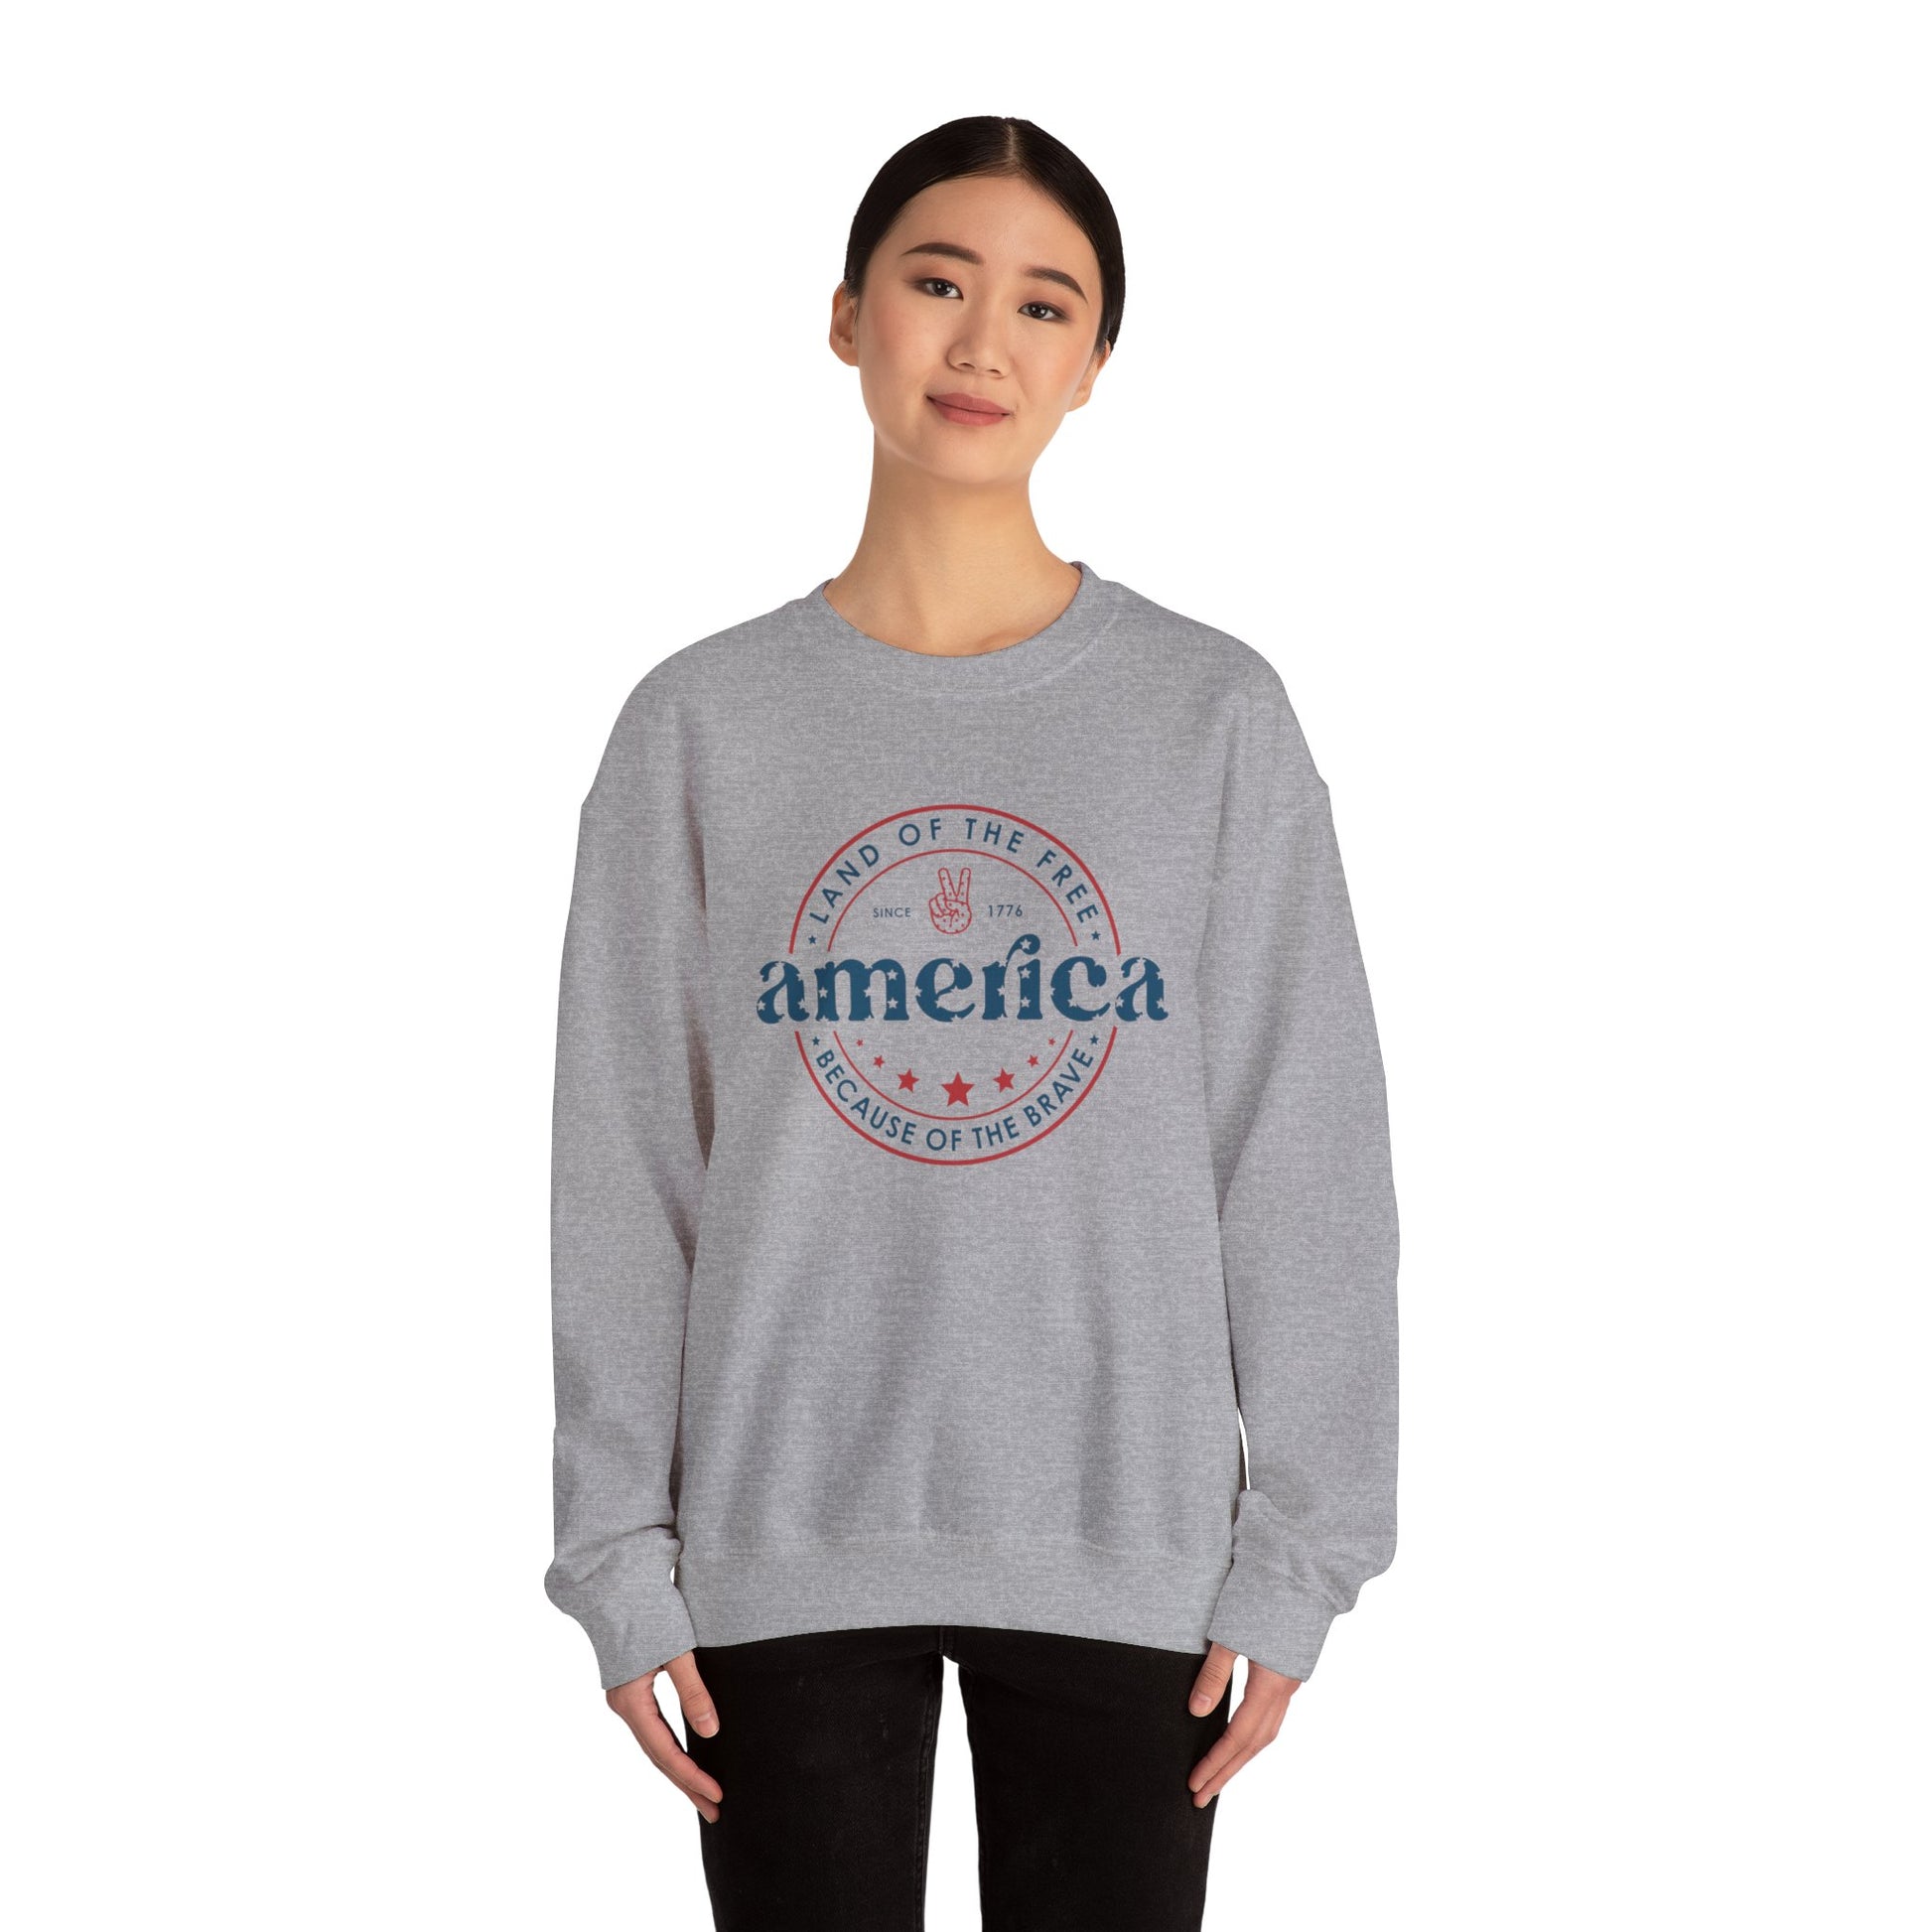 America: Land of the Free Because of the Brave Vintage Retro America Sweatshirt for Patriots - Stay Tomorrow Needs You America: Land of the Free Because of the Brave Vintage Retro America Sweatshirt for Patriots